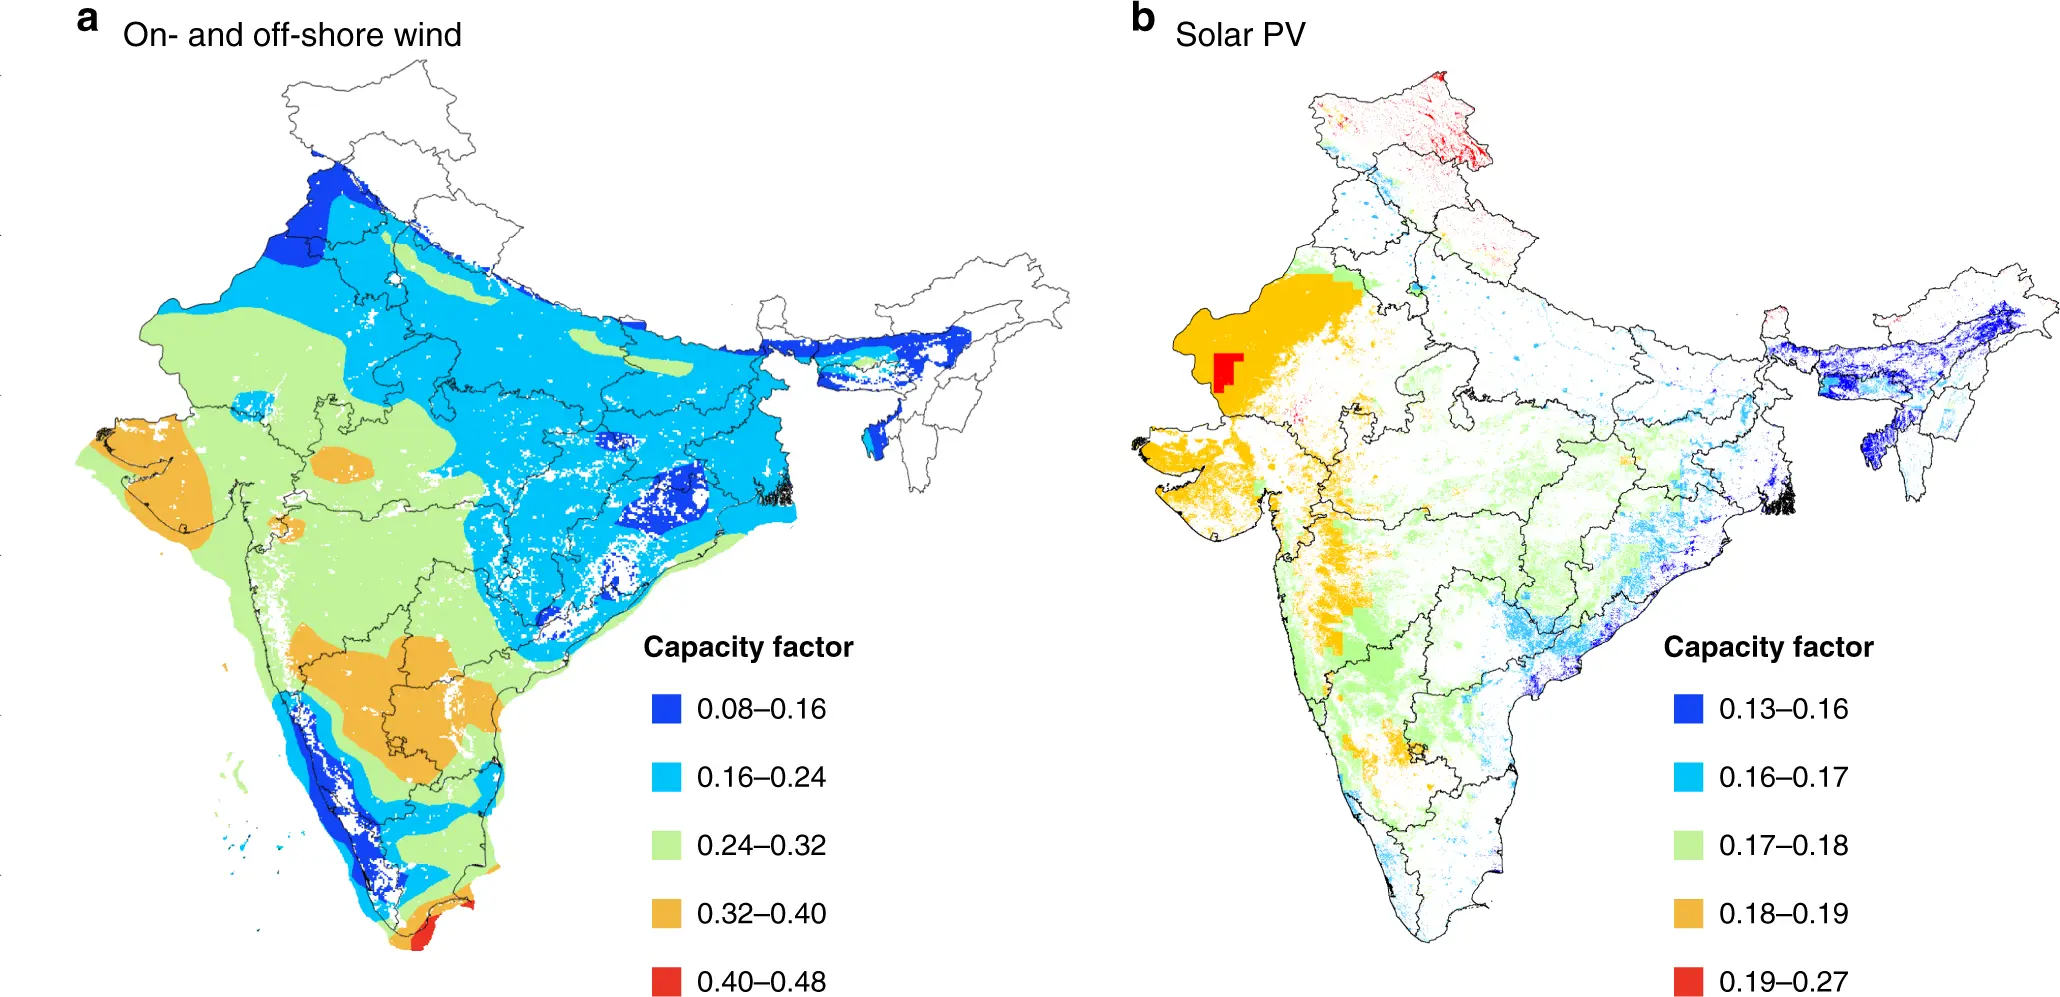 fund released to solar energy by s indian states - What is the international funding for solar projects in India